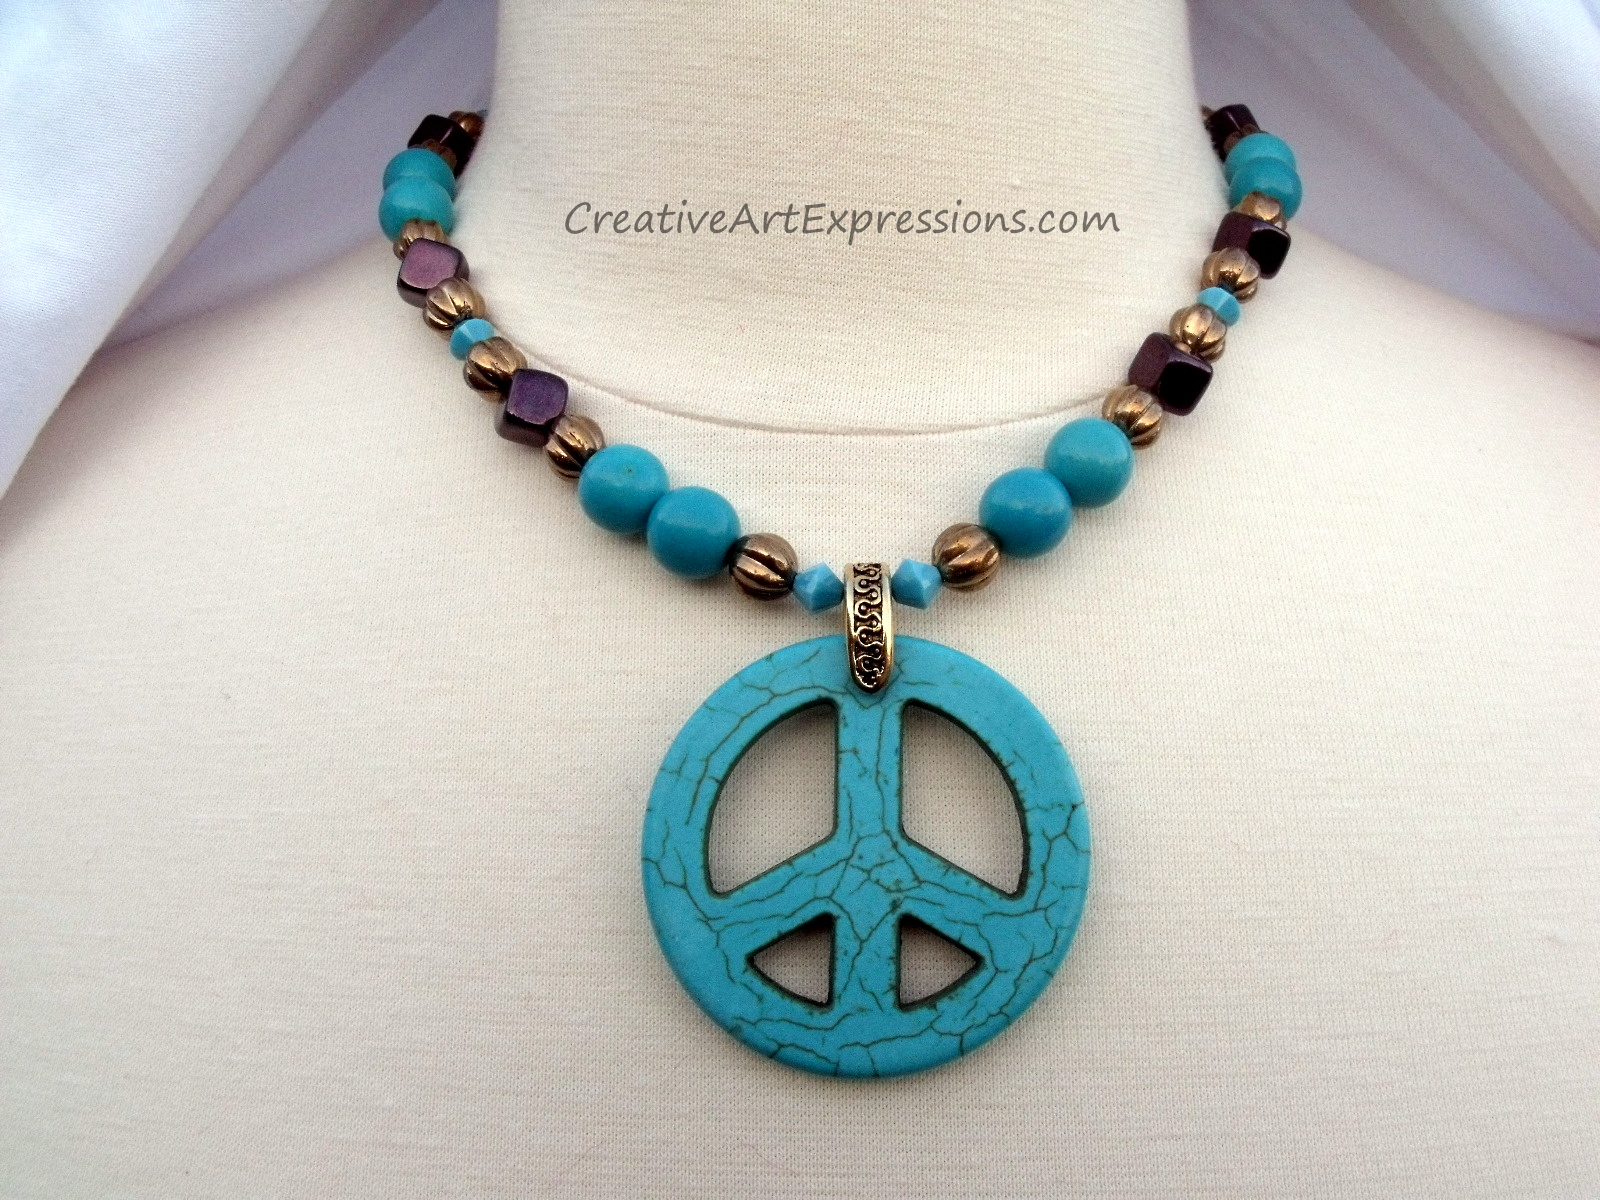 Creative Art Expressions Handmade Turquoise & Gold Necklace Jewelry Design